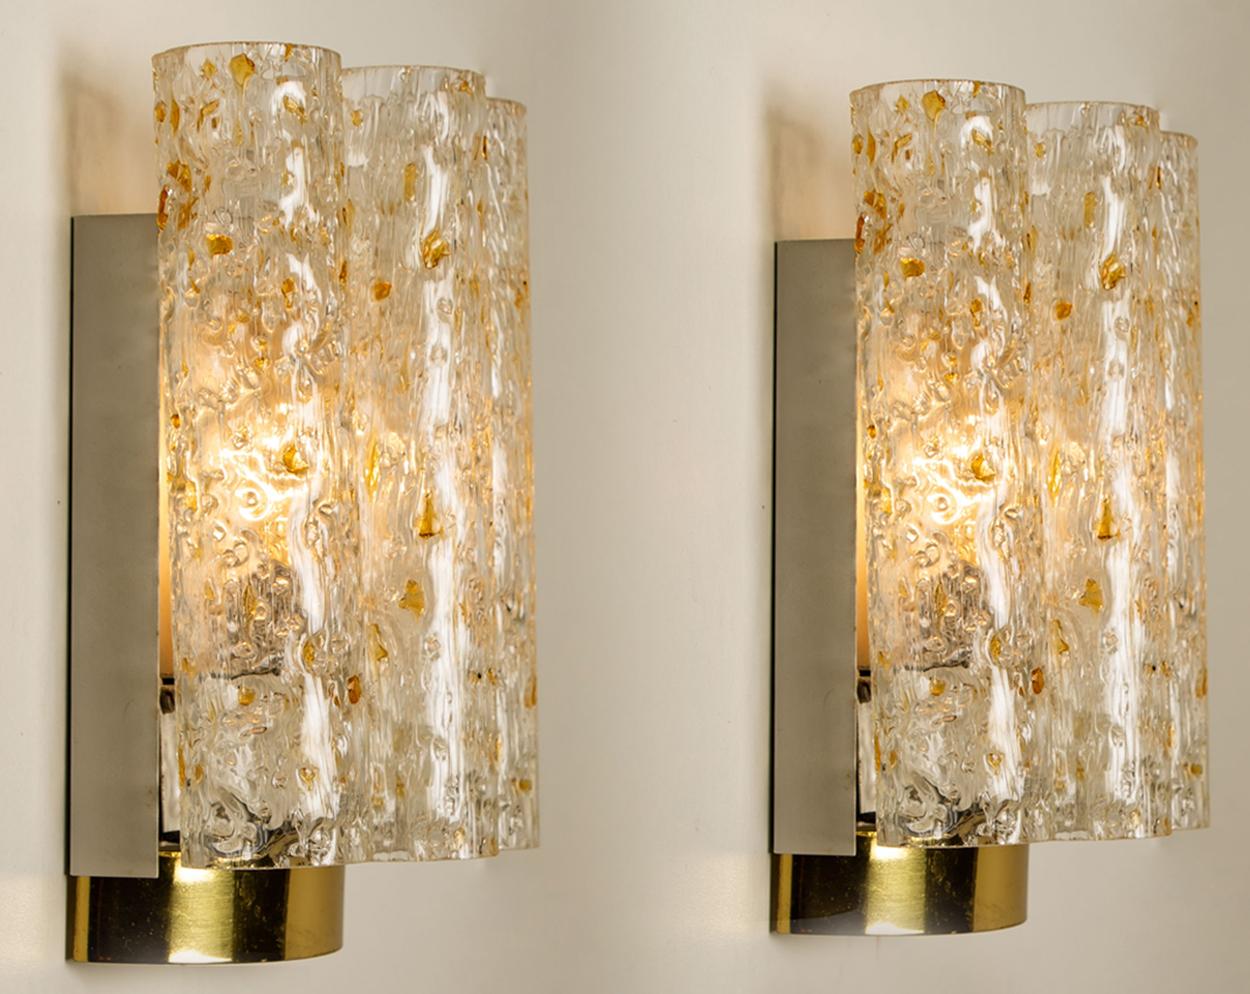 1 of the 6 Doria Wall Lamps in Brass and Glass, 1960s For Sale 11